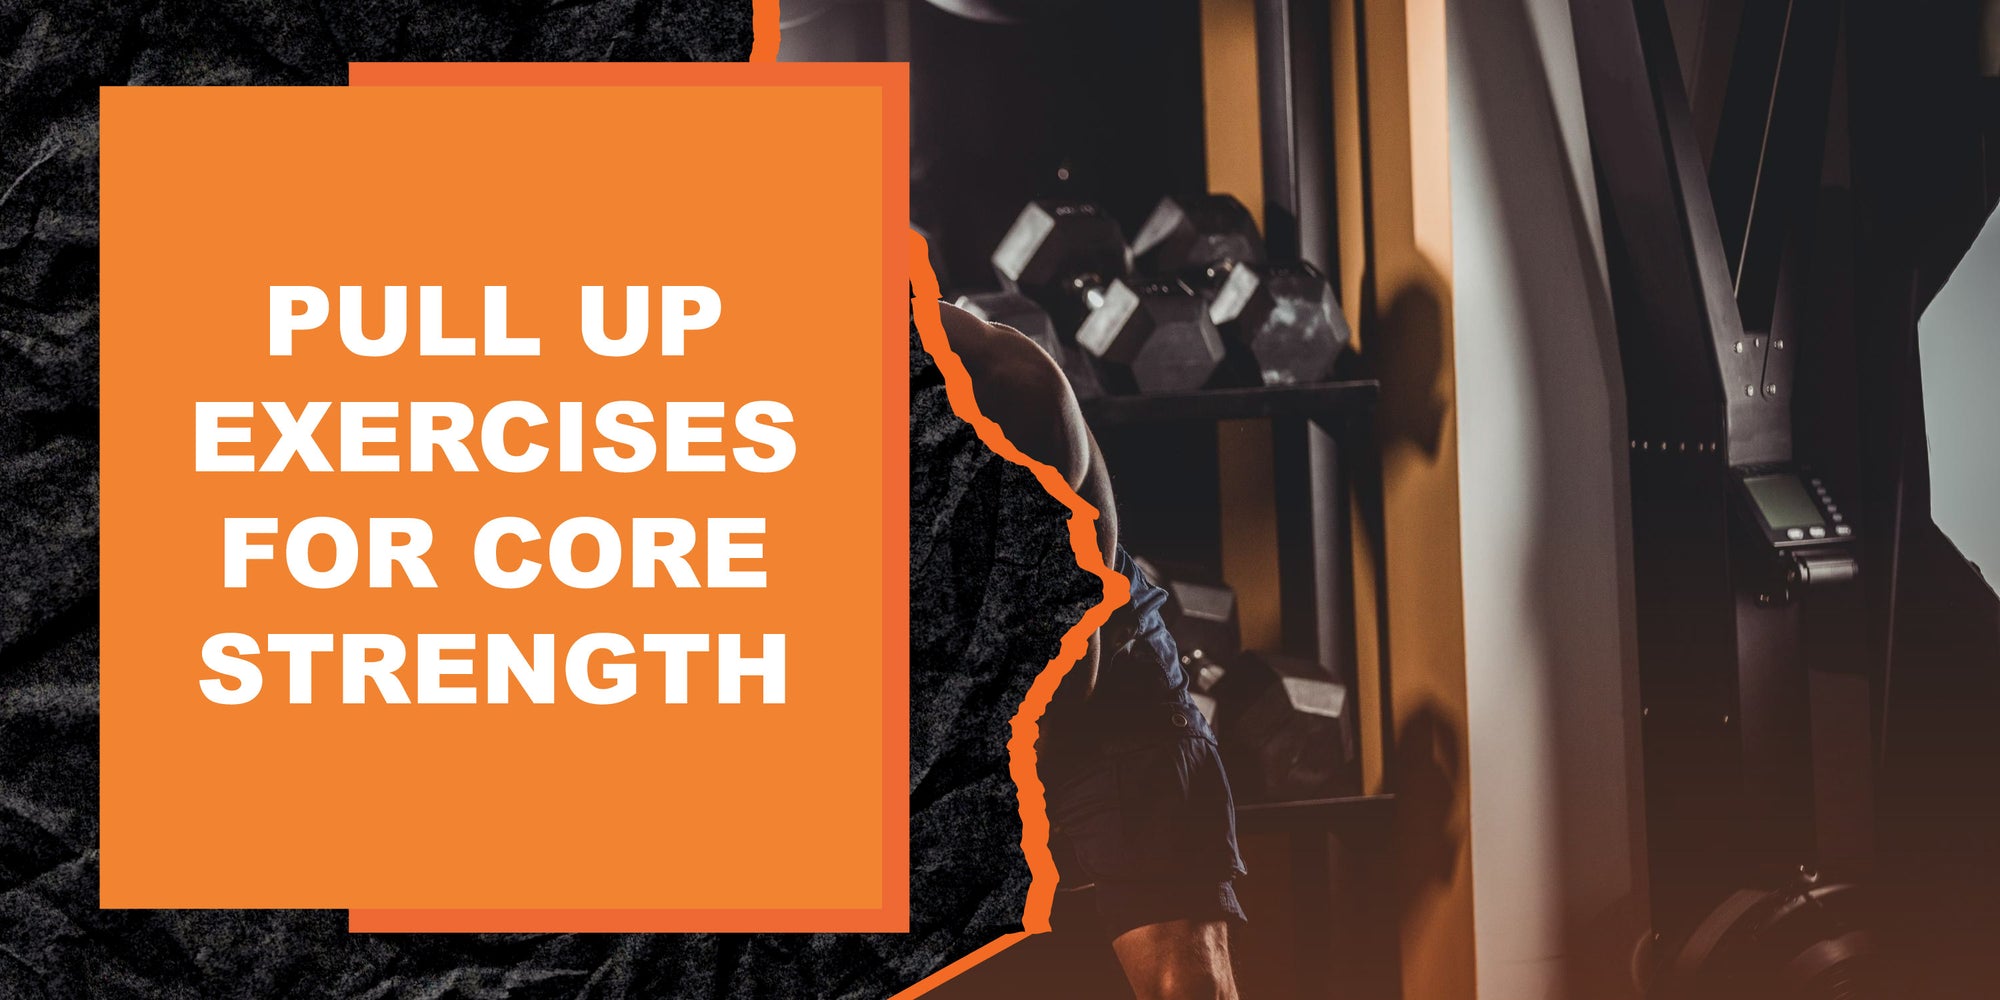 The Ultimate Guide to Pull Up Exercises for Core Strength